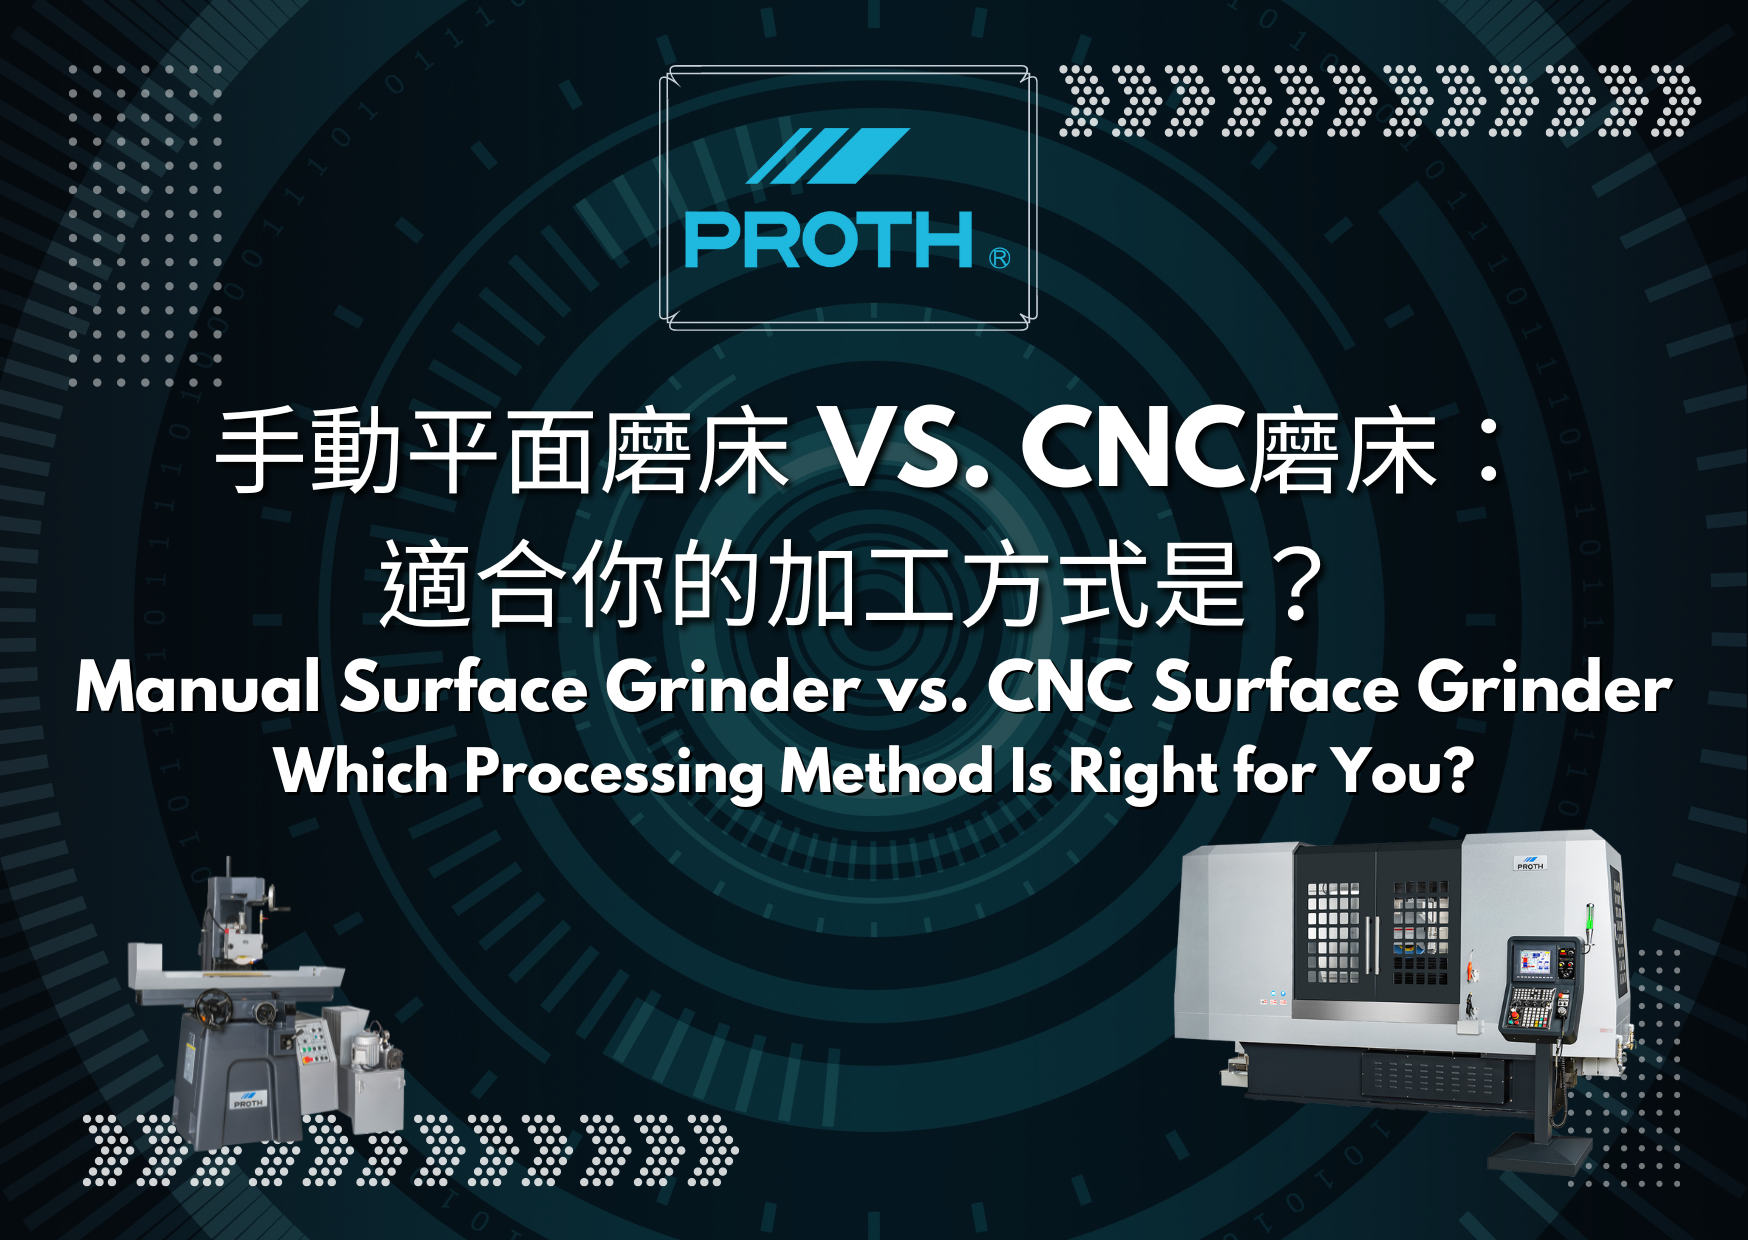 Manual Surface Grinder vs. CNC Grinder: Which Processing Method Is Right for You?